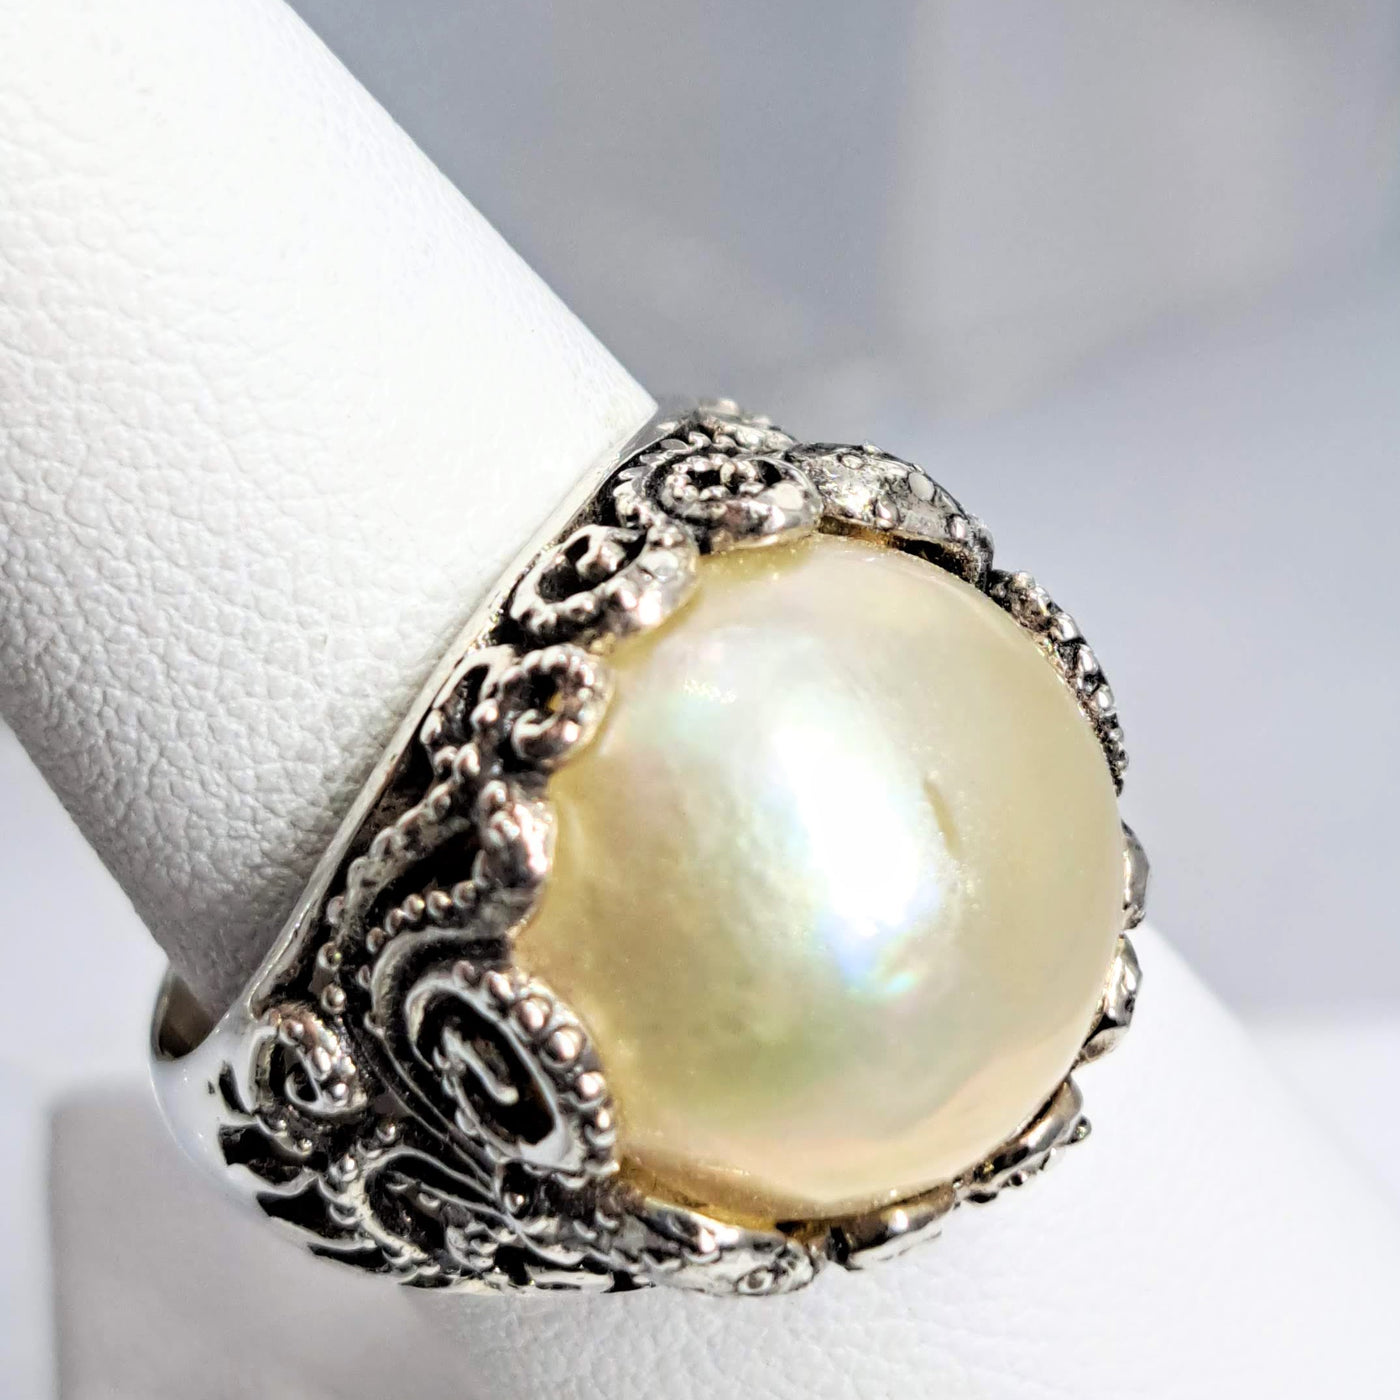 "My Octopus Pearl" Size 8 Ring - Mabé Pearl, Sterling